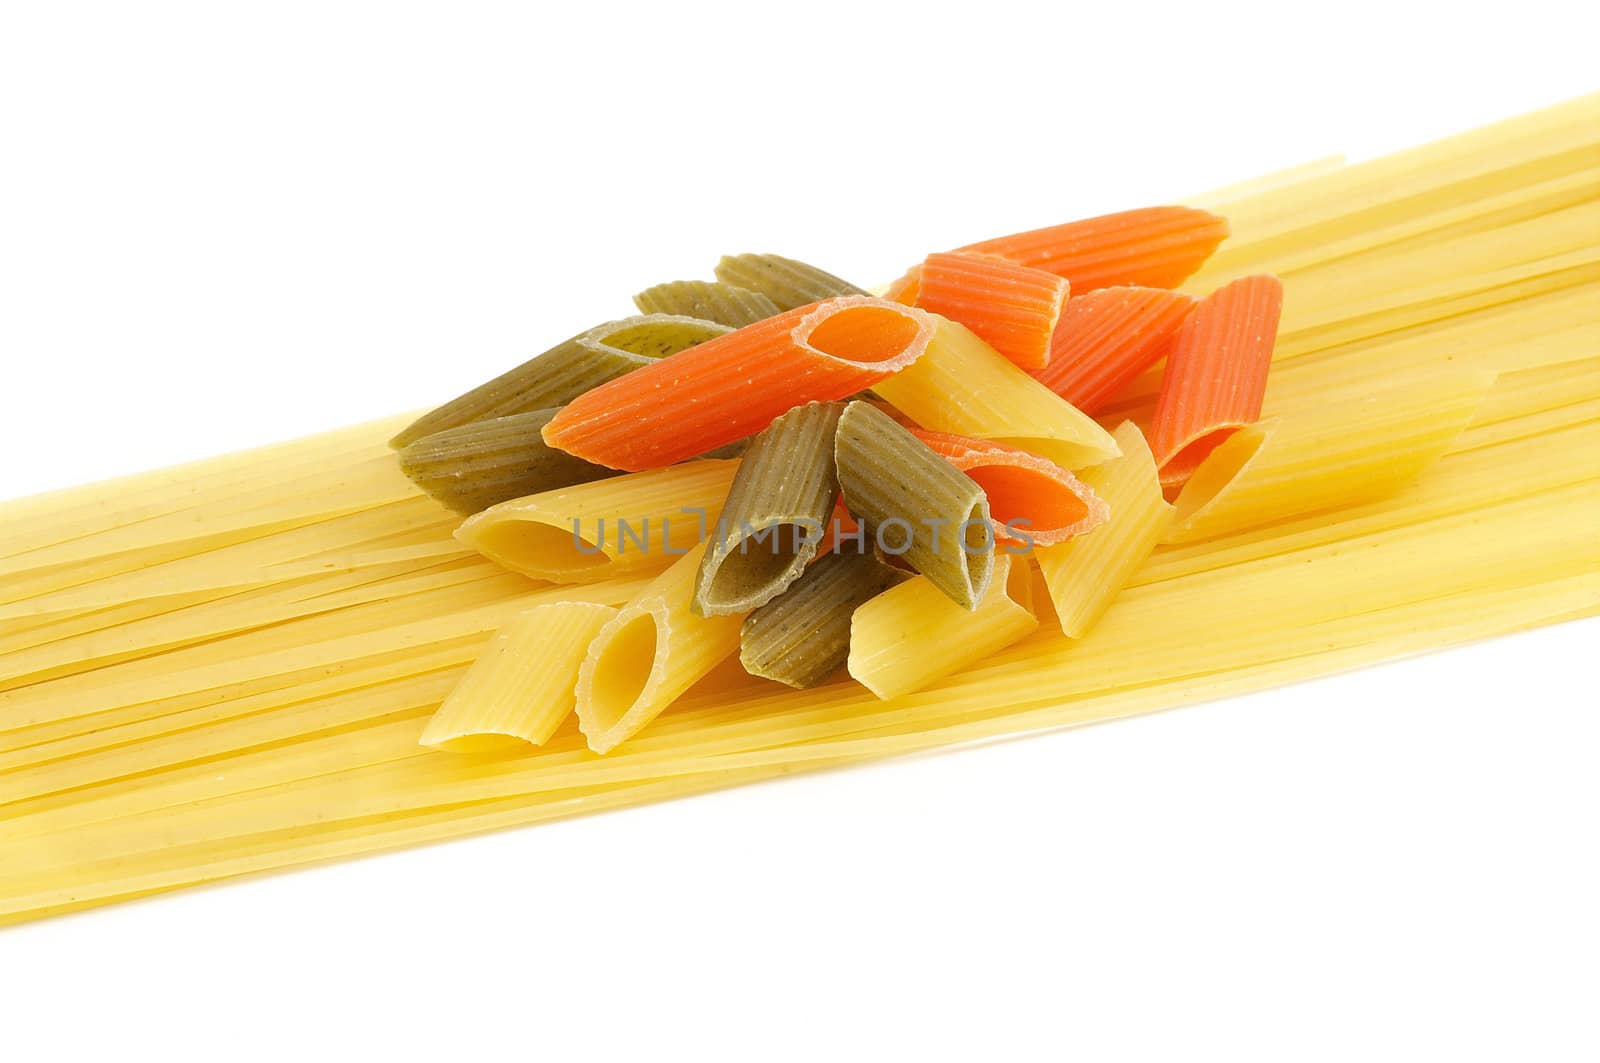 Italian pasta spaghetti and Penne rigate tricolore isolated on white background